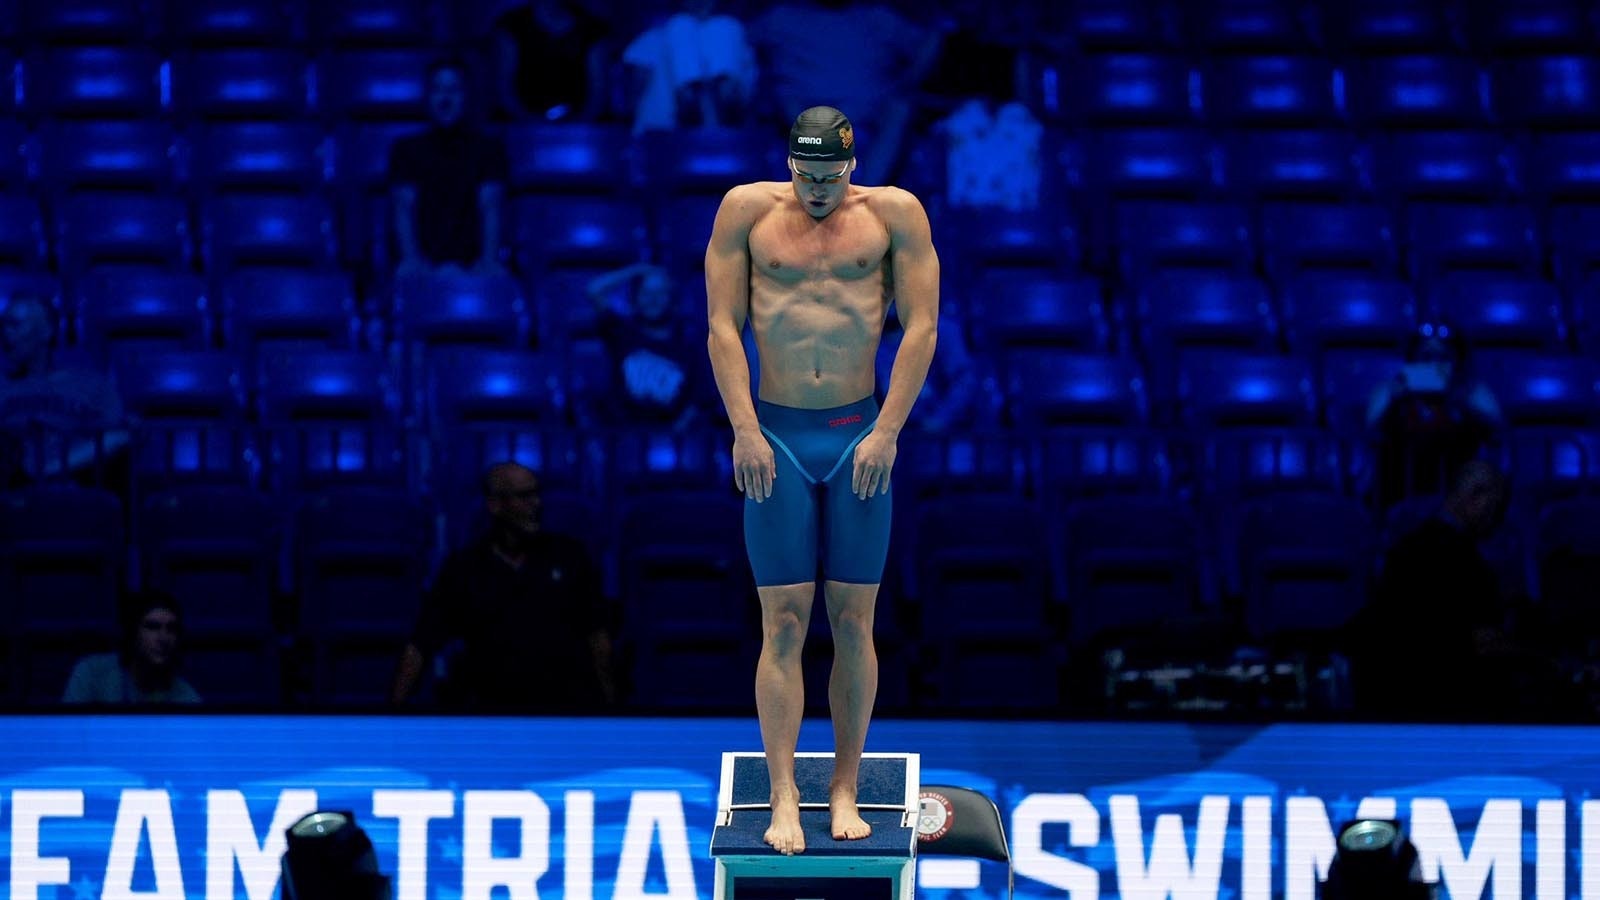 Jonny Kulow prepares for a swim-off in the 50-meter freestyle on Thursday during the U.S. Olympic Swim Trials in Indianapolis, Indiana. The two swimmers tied again and had to do a second swim-off, which Kulow finished second.